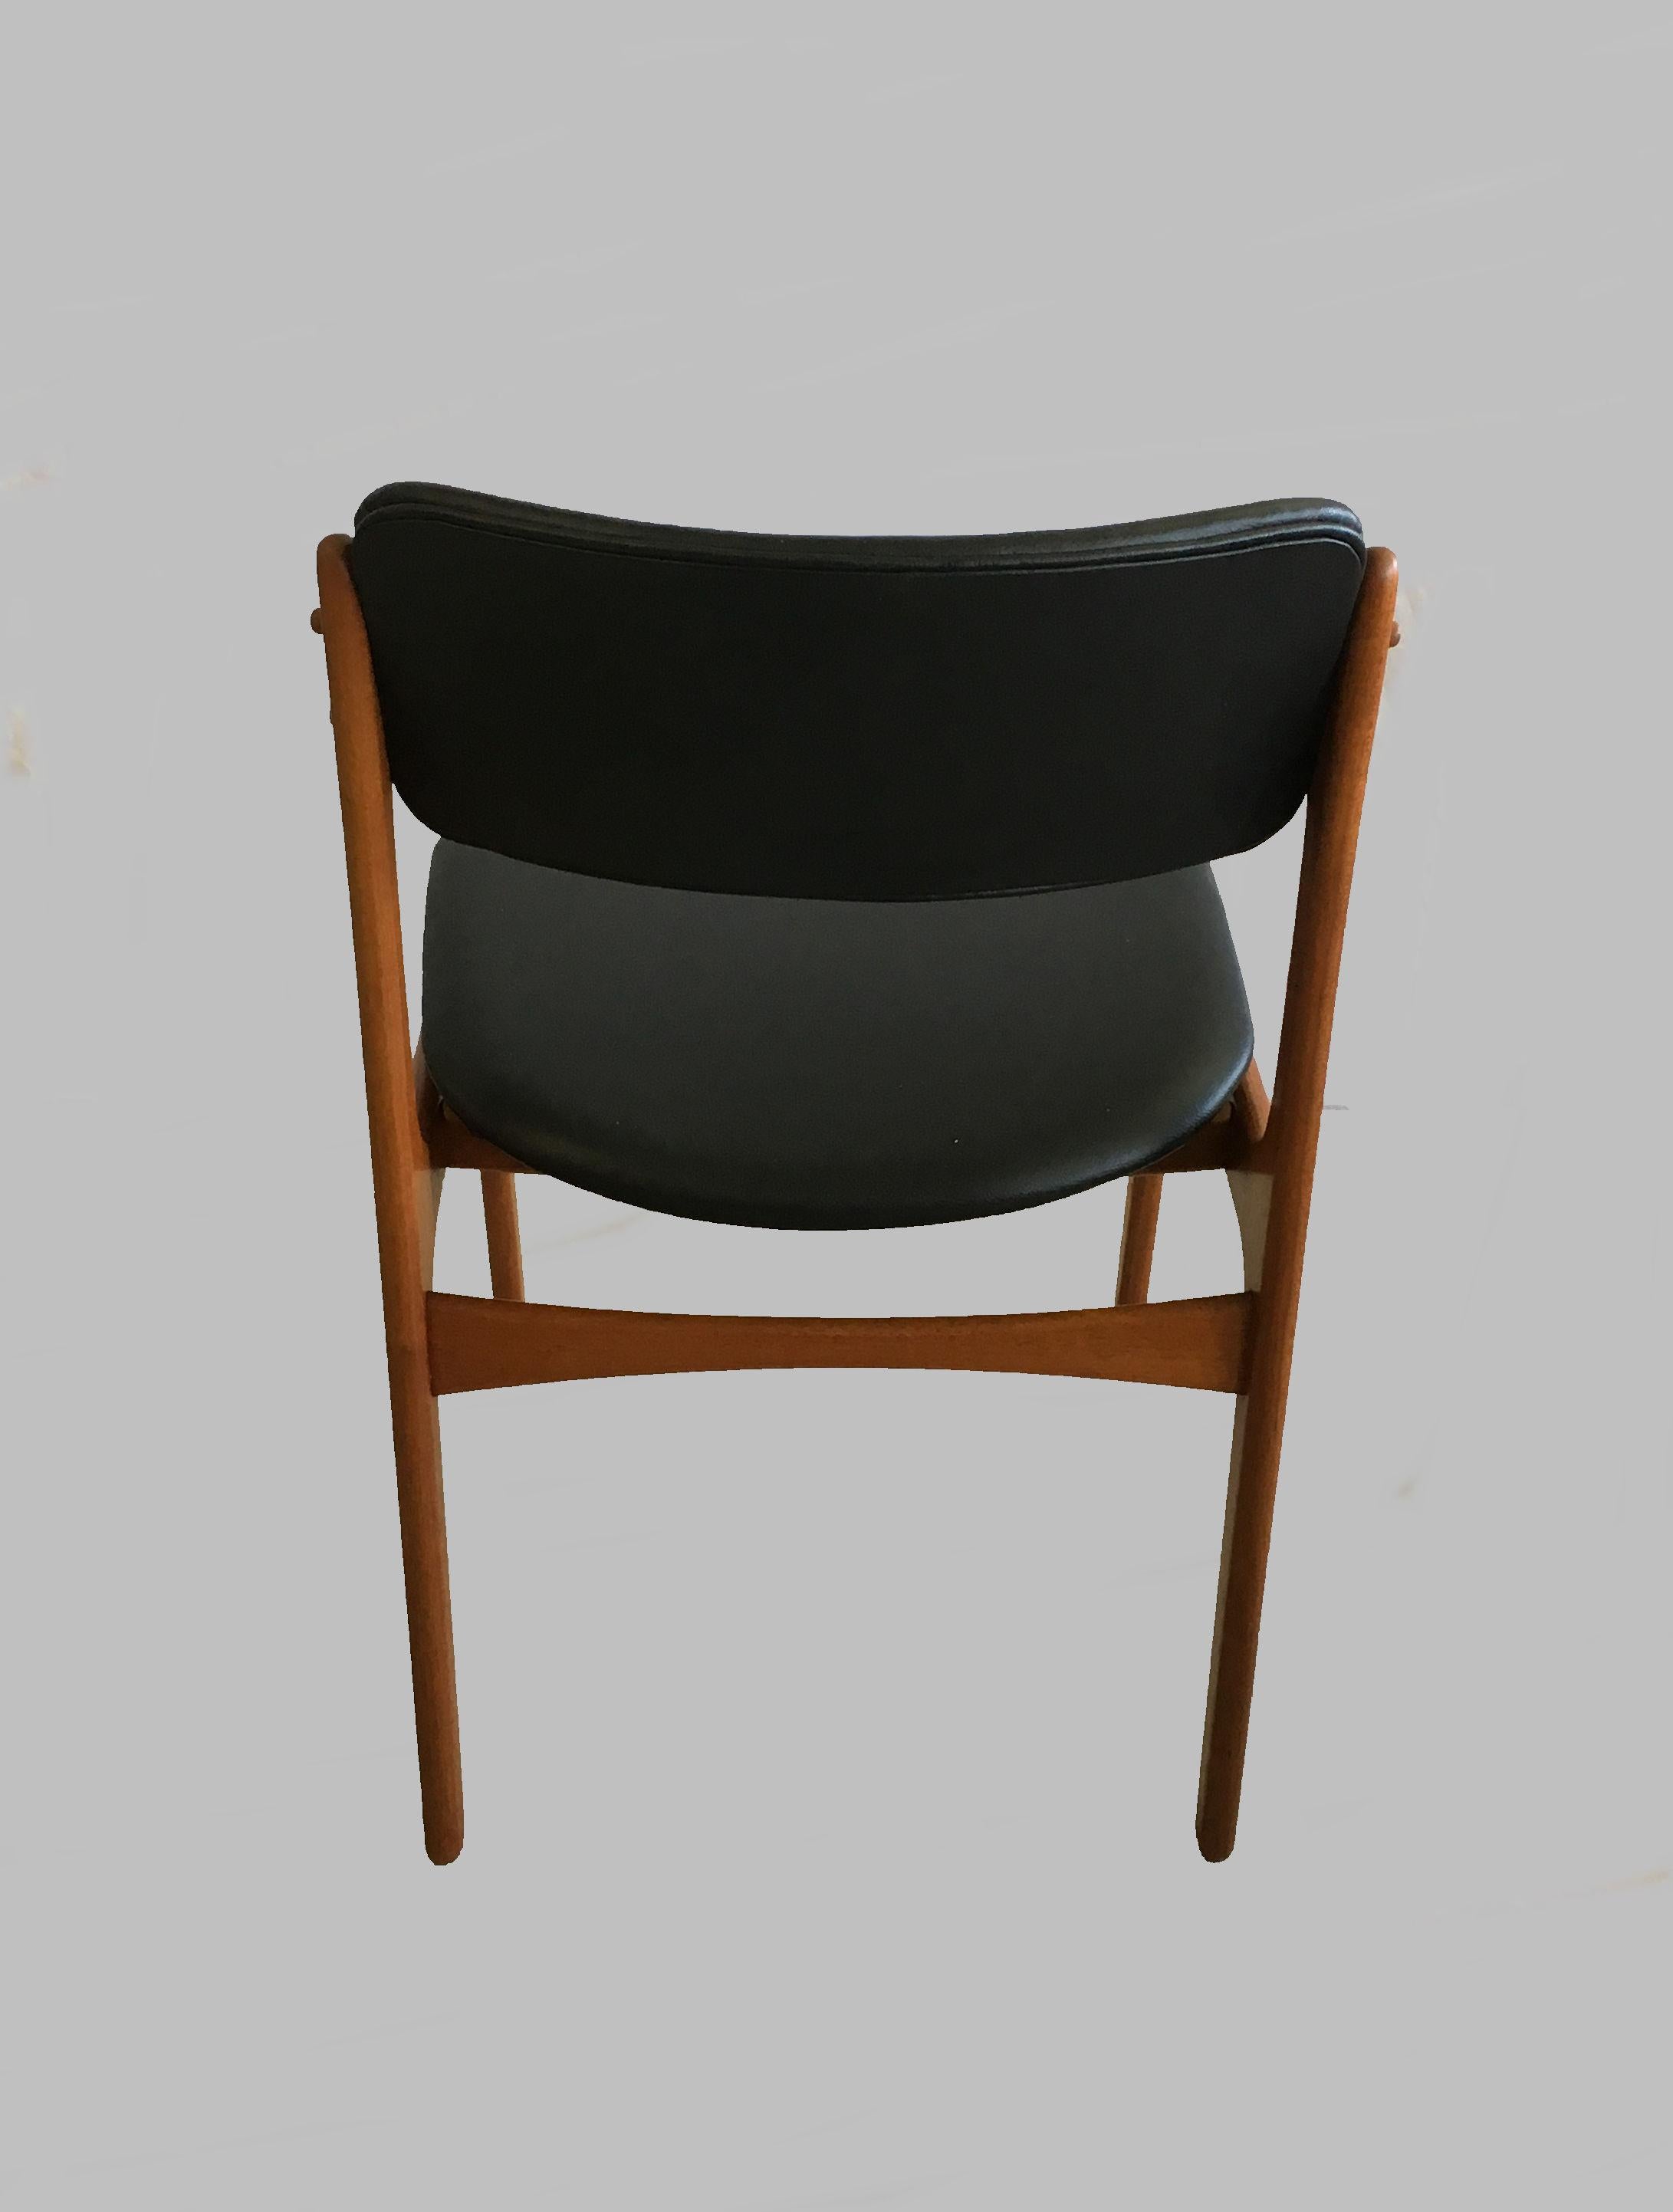 Mid-20th Century Six Fully Restored Erik Buch Teak Dining Chairs, Reupholstered in Black Leather For Sale